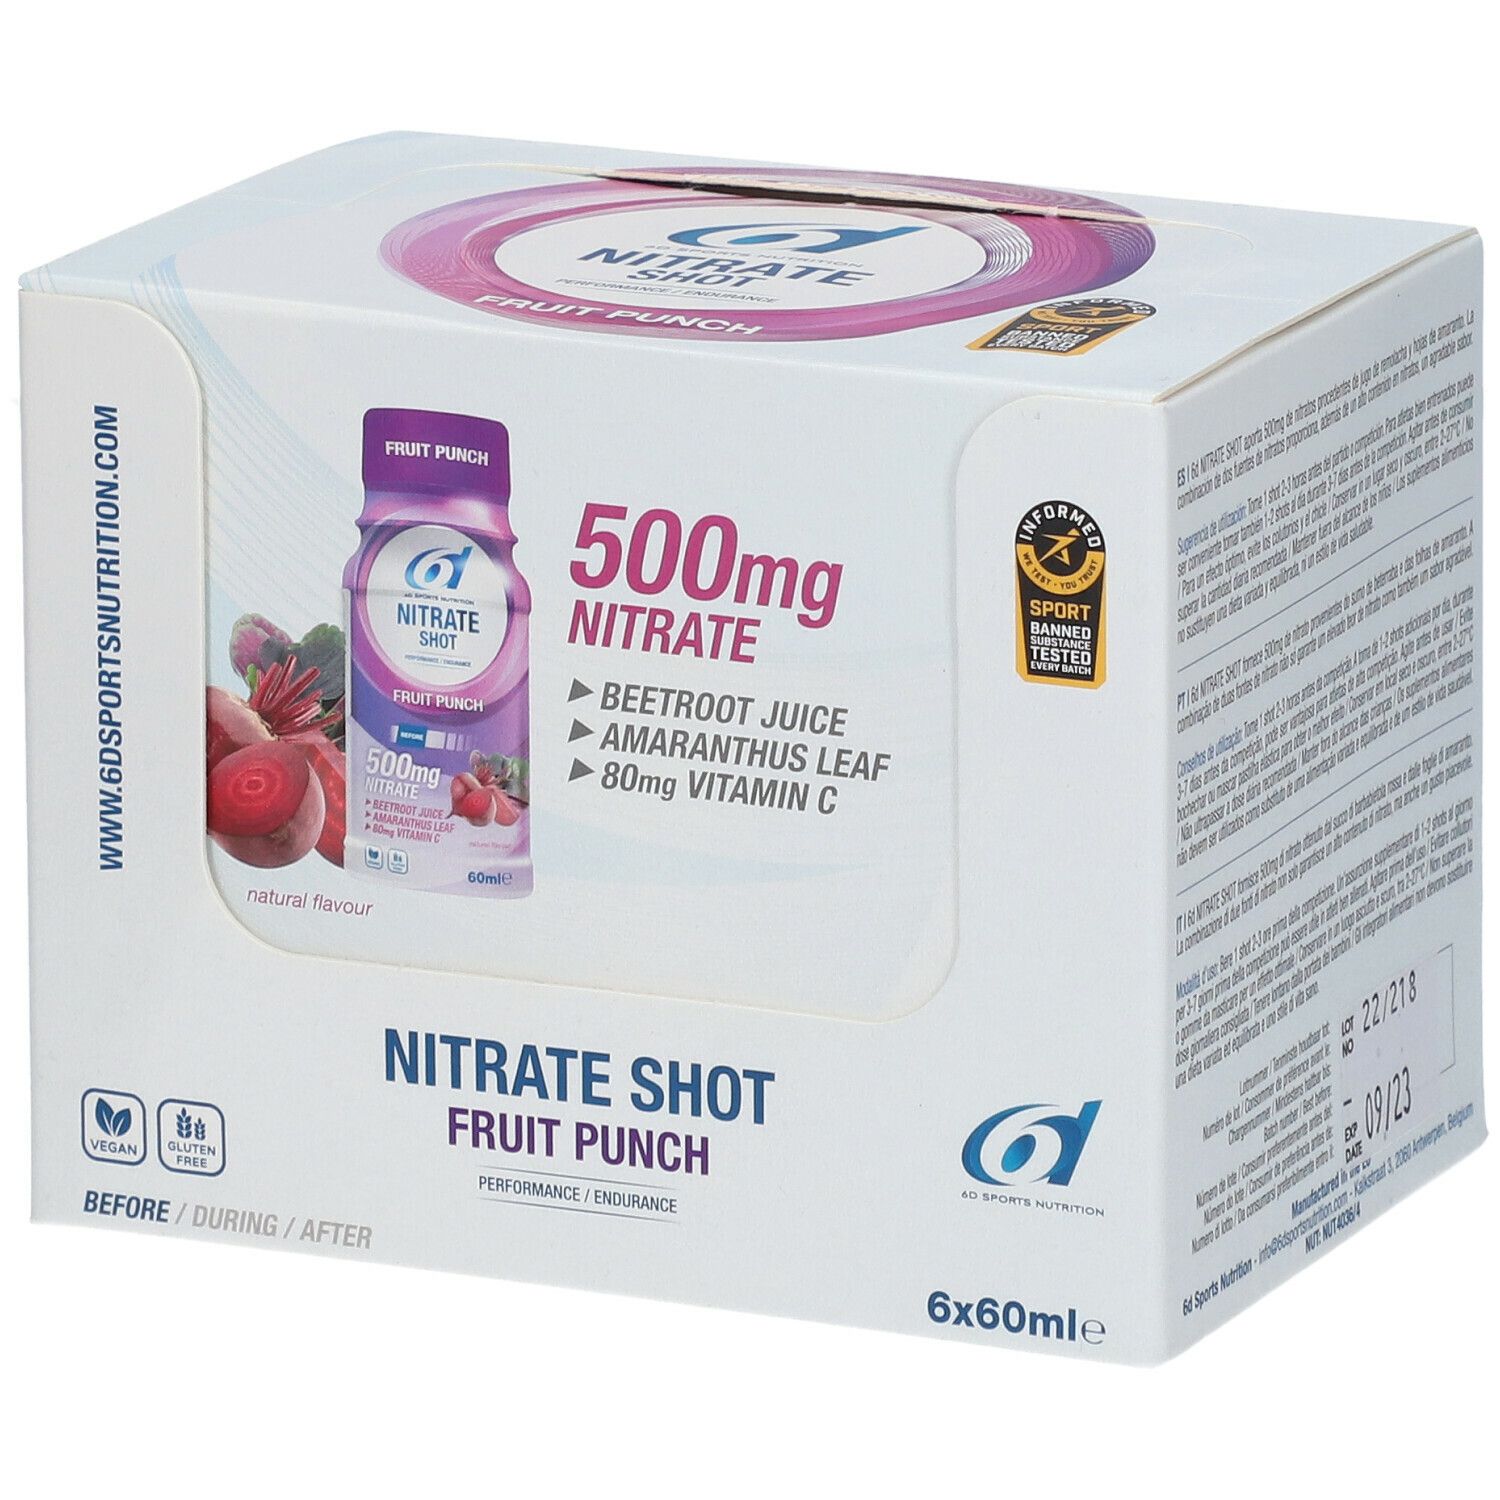 6D Sports Nutrition Nitrate Shot Fruits punch 6x60ml